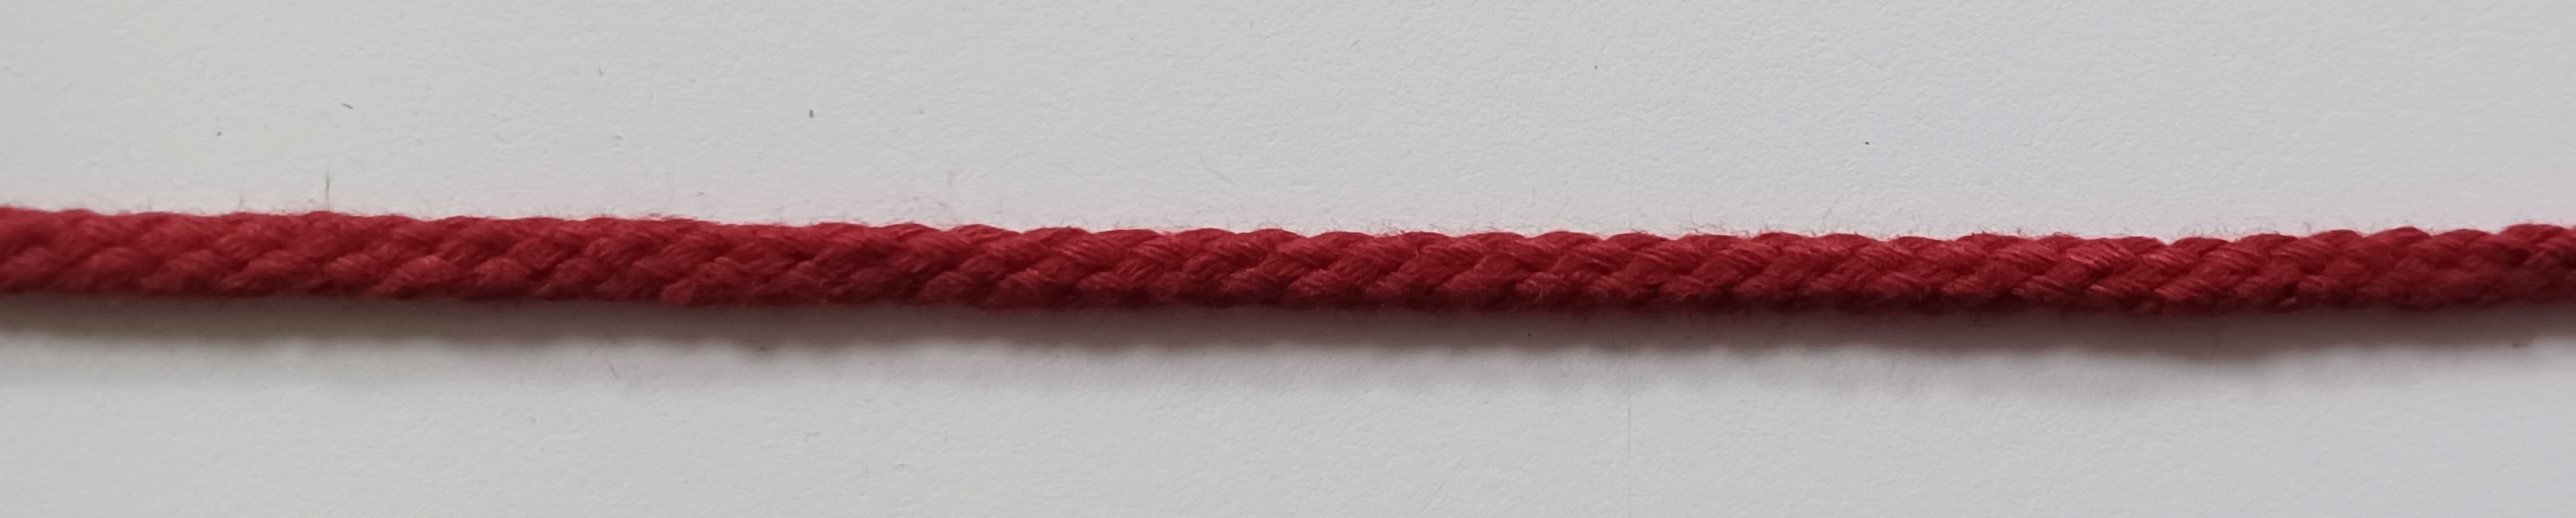 Deepest Red 3/16"" Cotton Drawstring Cord